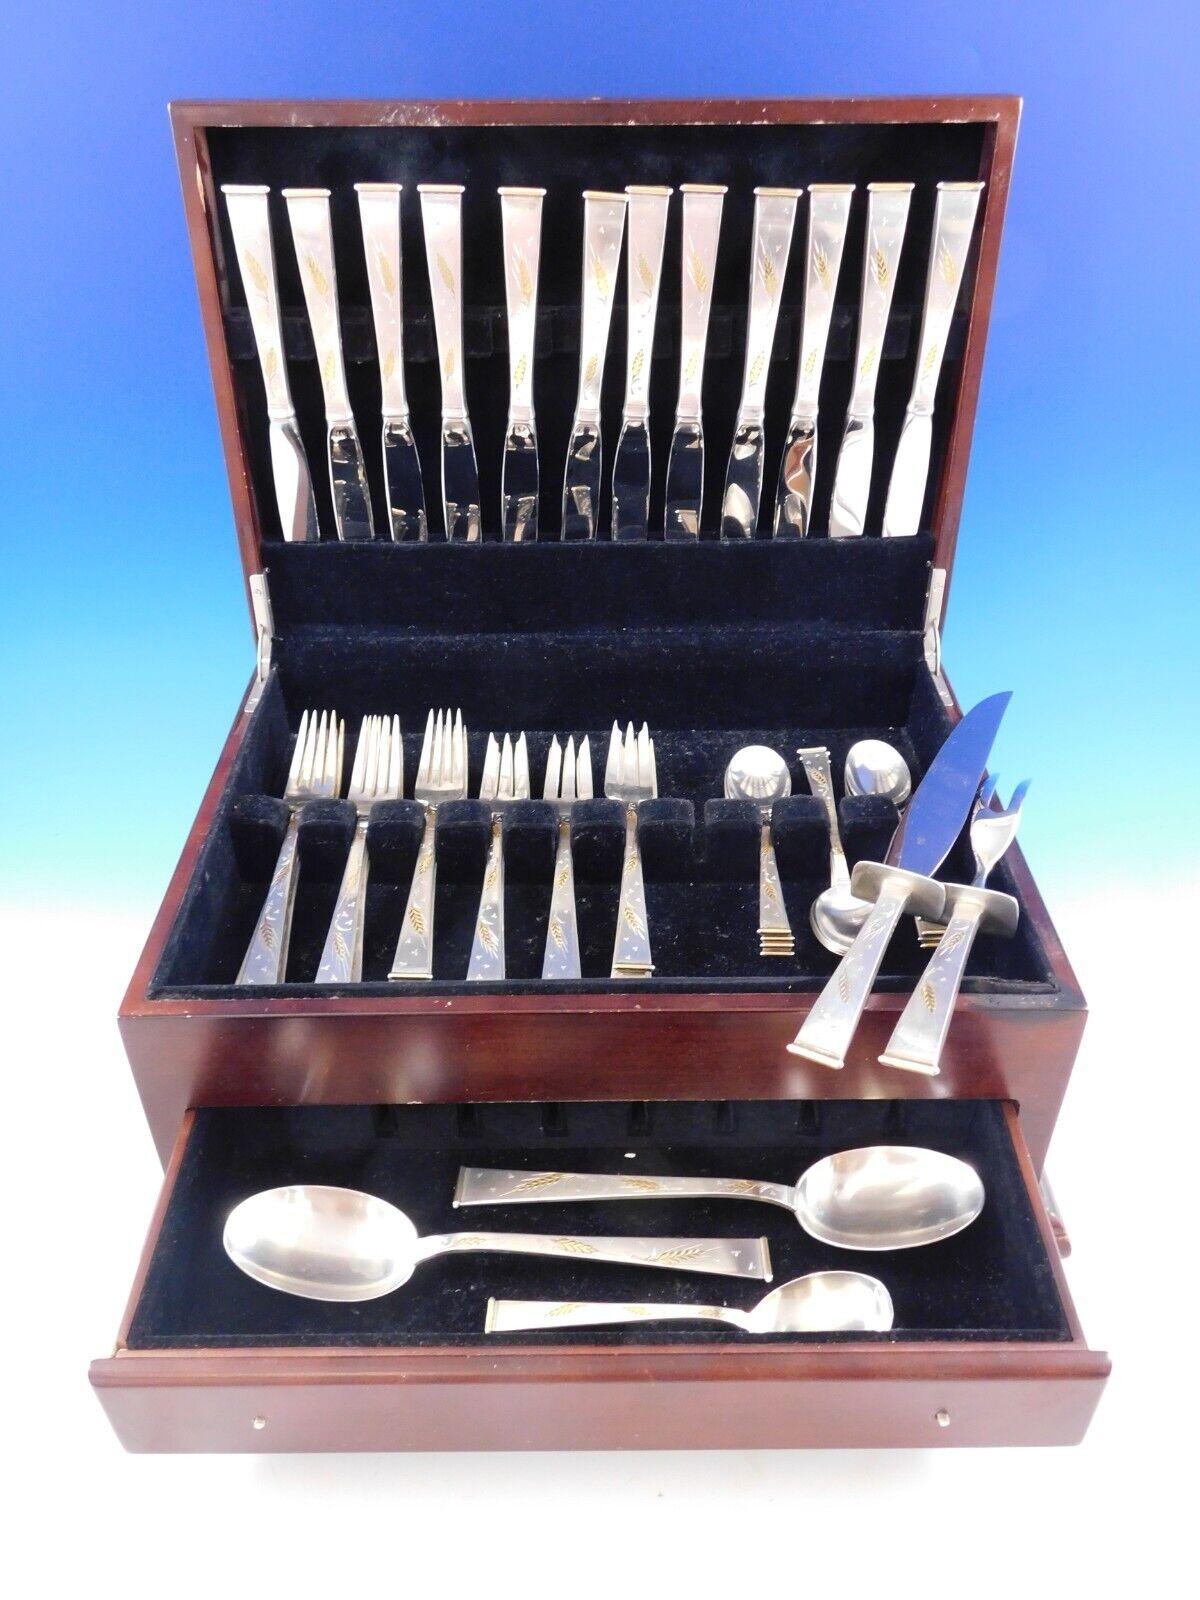 Scarce Golden Wheat by Gorham Sterling Silver Flatware set - 53 pieces. This set includes:
12 Knives, 9 1/4